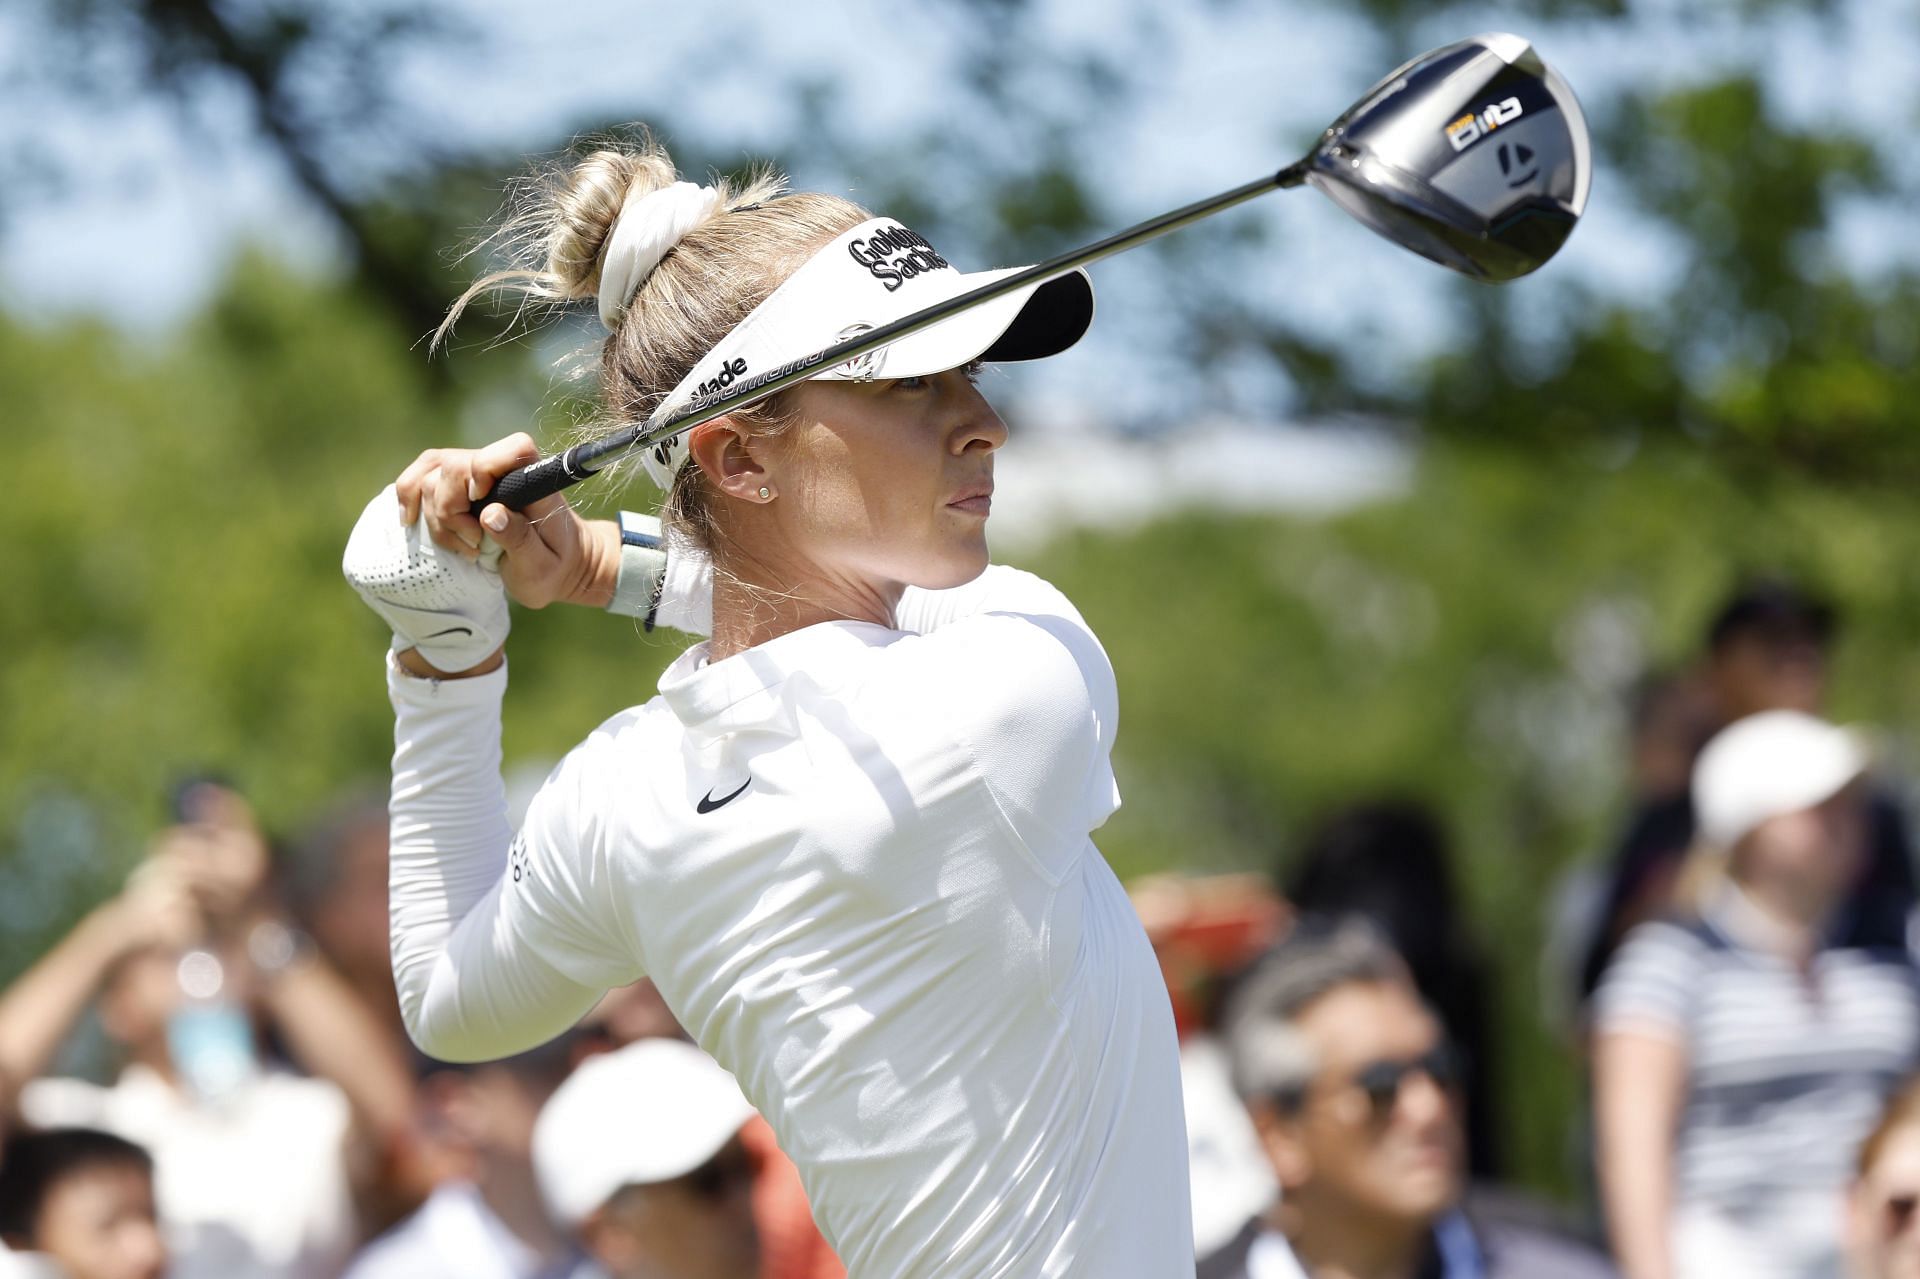 Nelly Korda playing from the sixth tee at the Mizuho Americas Open (Image via Getty)